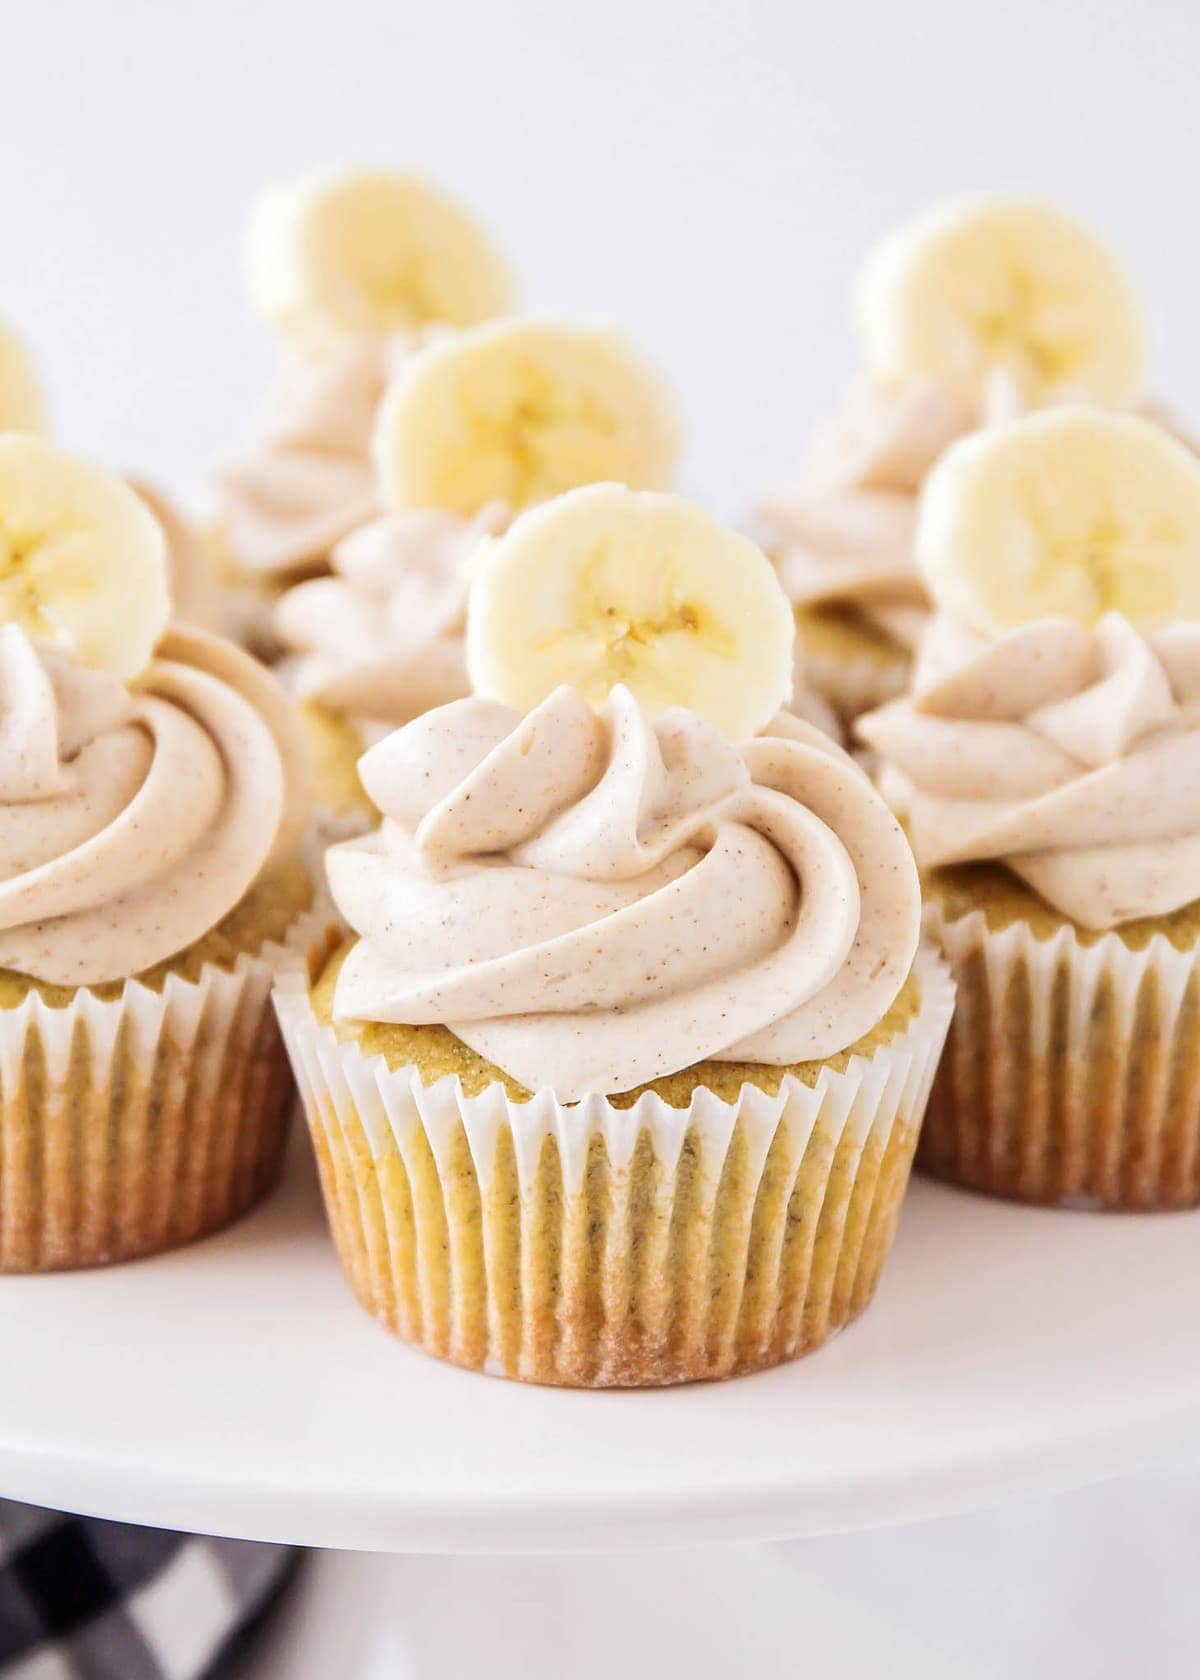 Banana cupcakes with cream cheese frosting on a cake stand